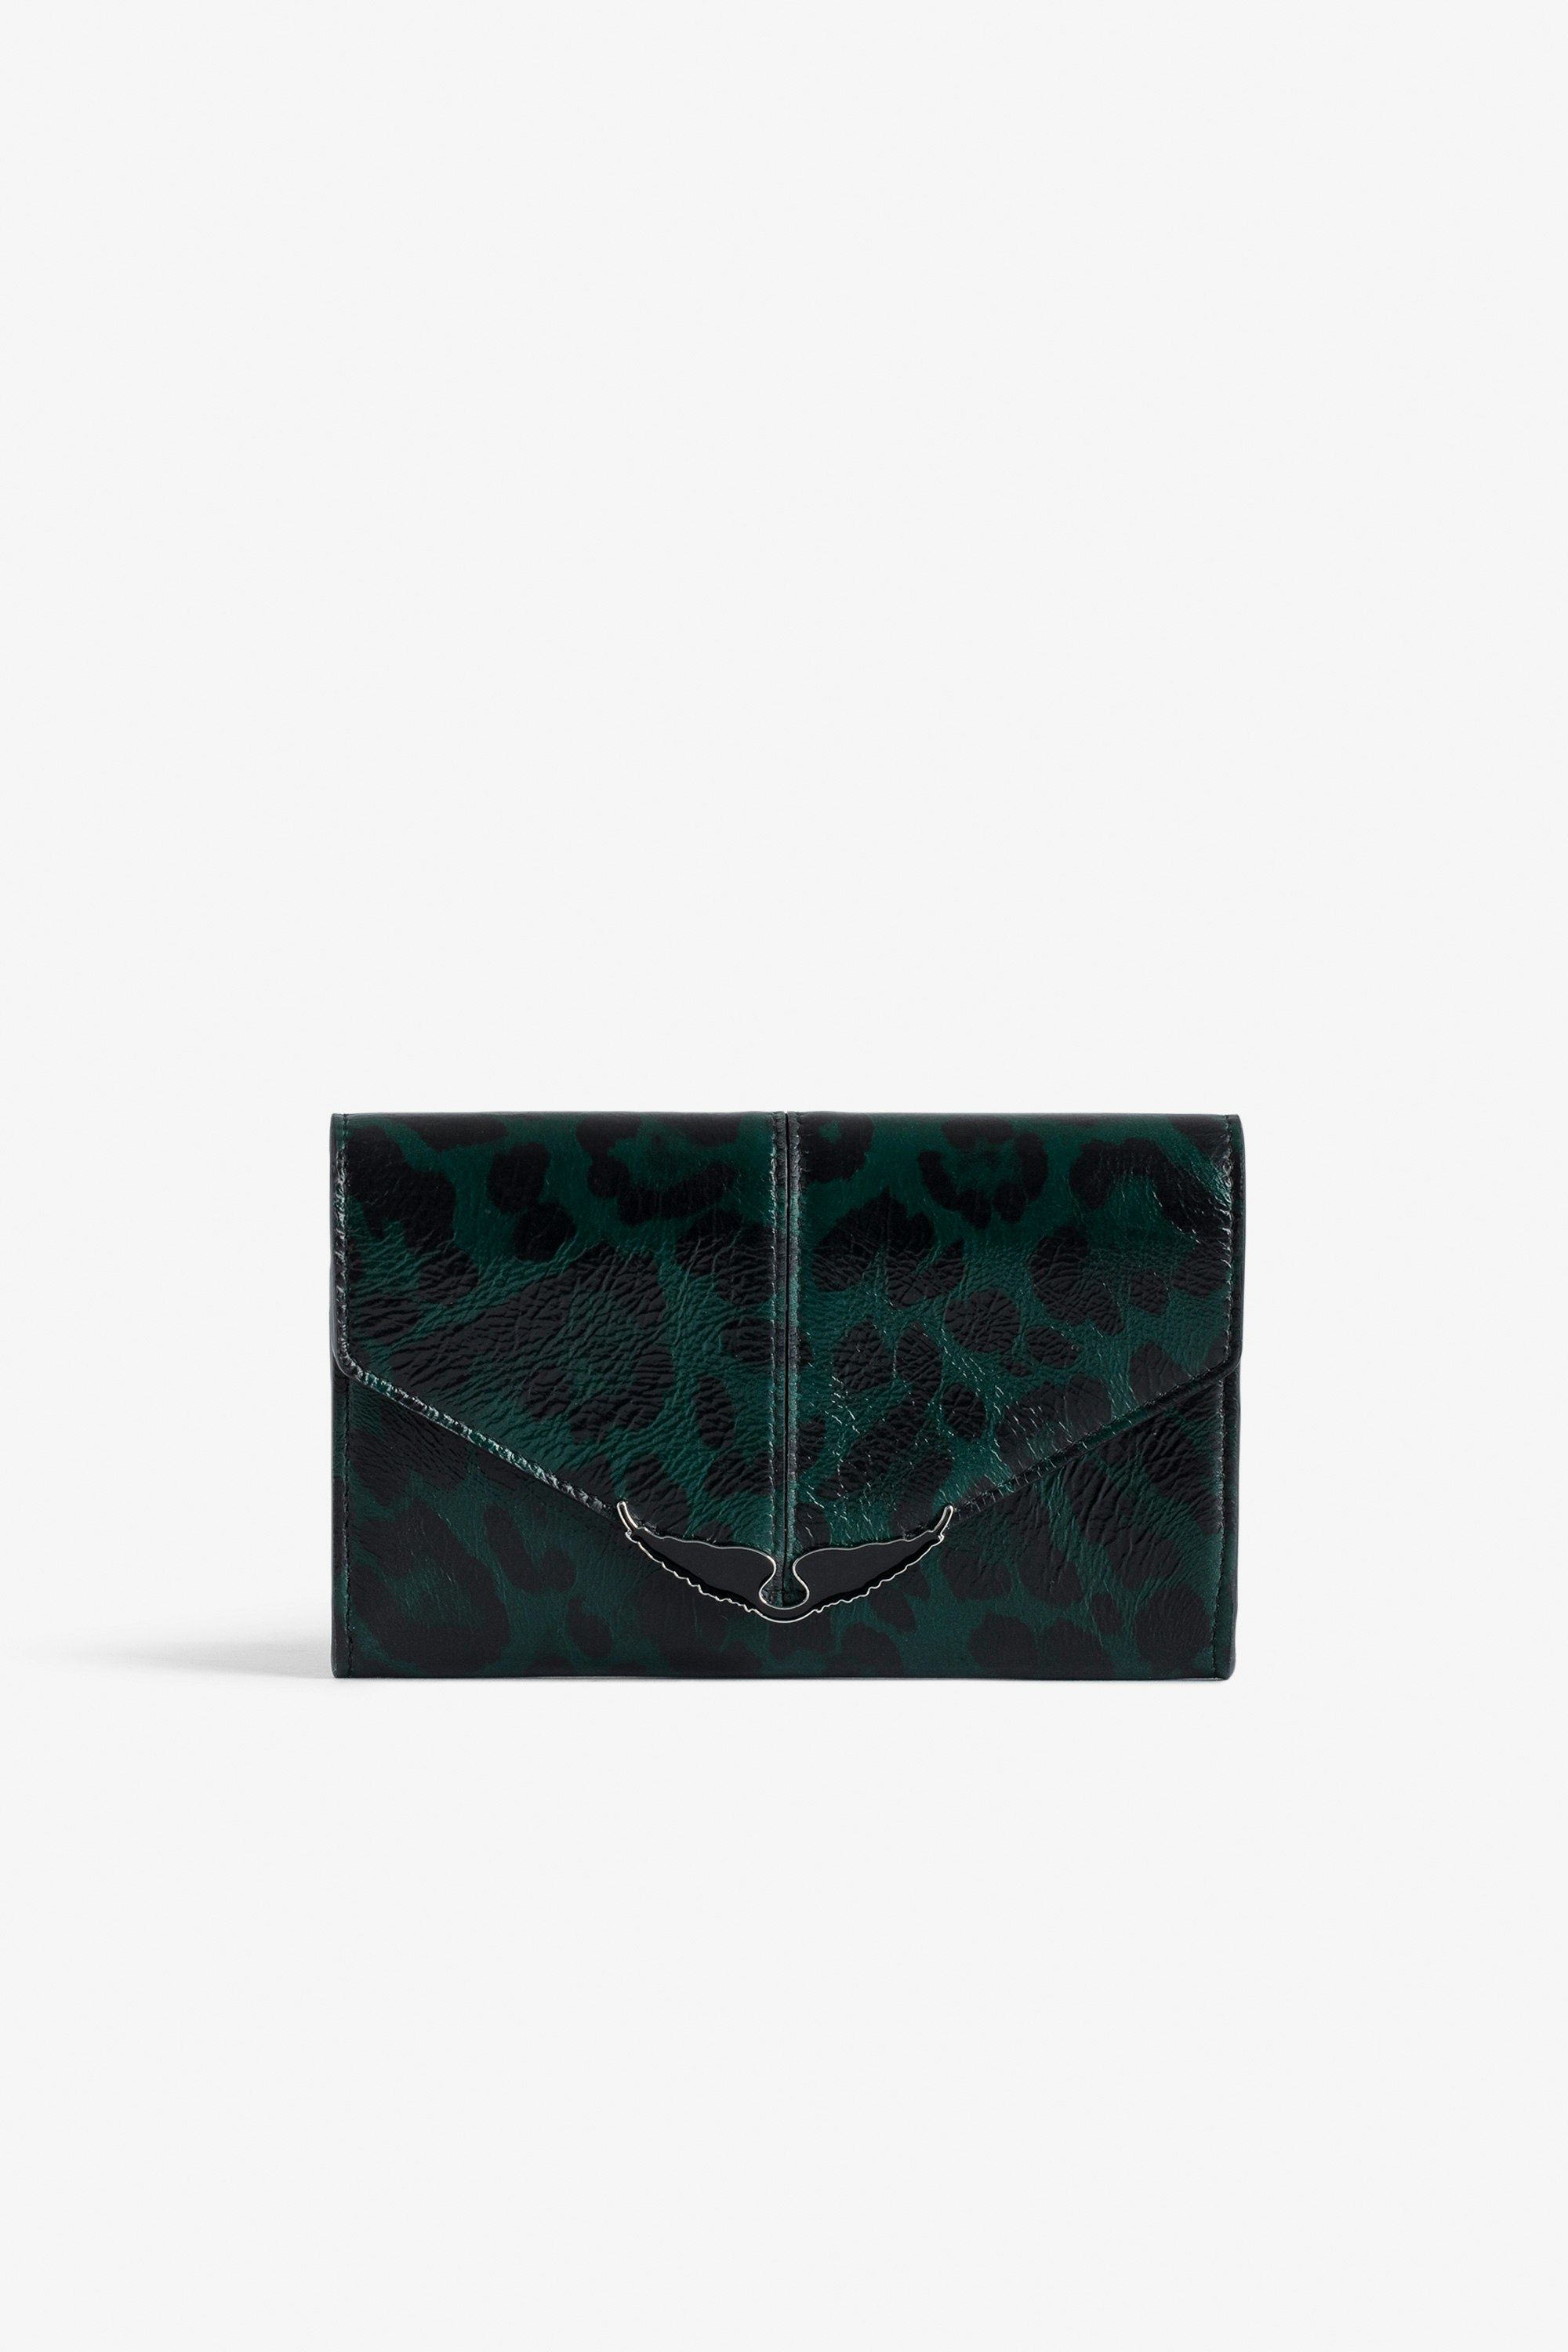 Borderline Wallet Women’s green leopard-print patent leather wallet with wings charm.